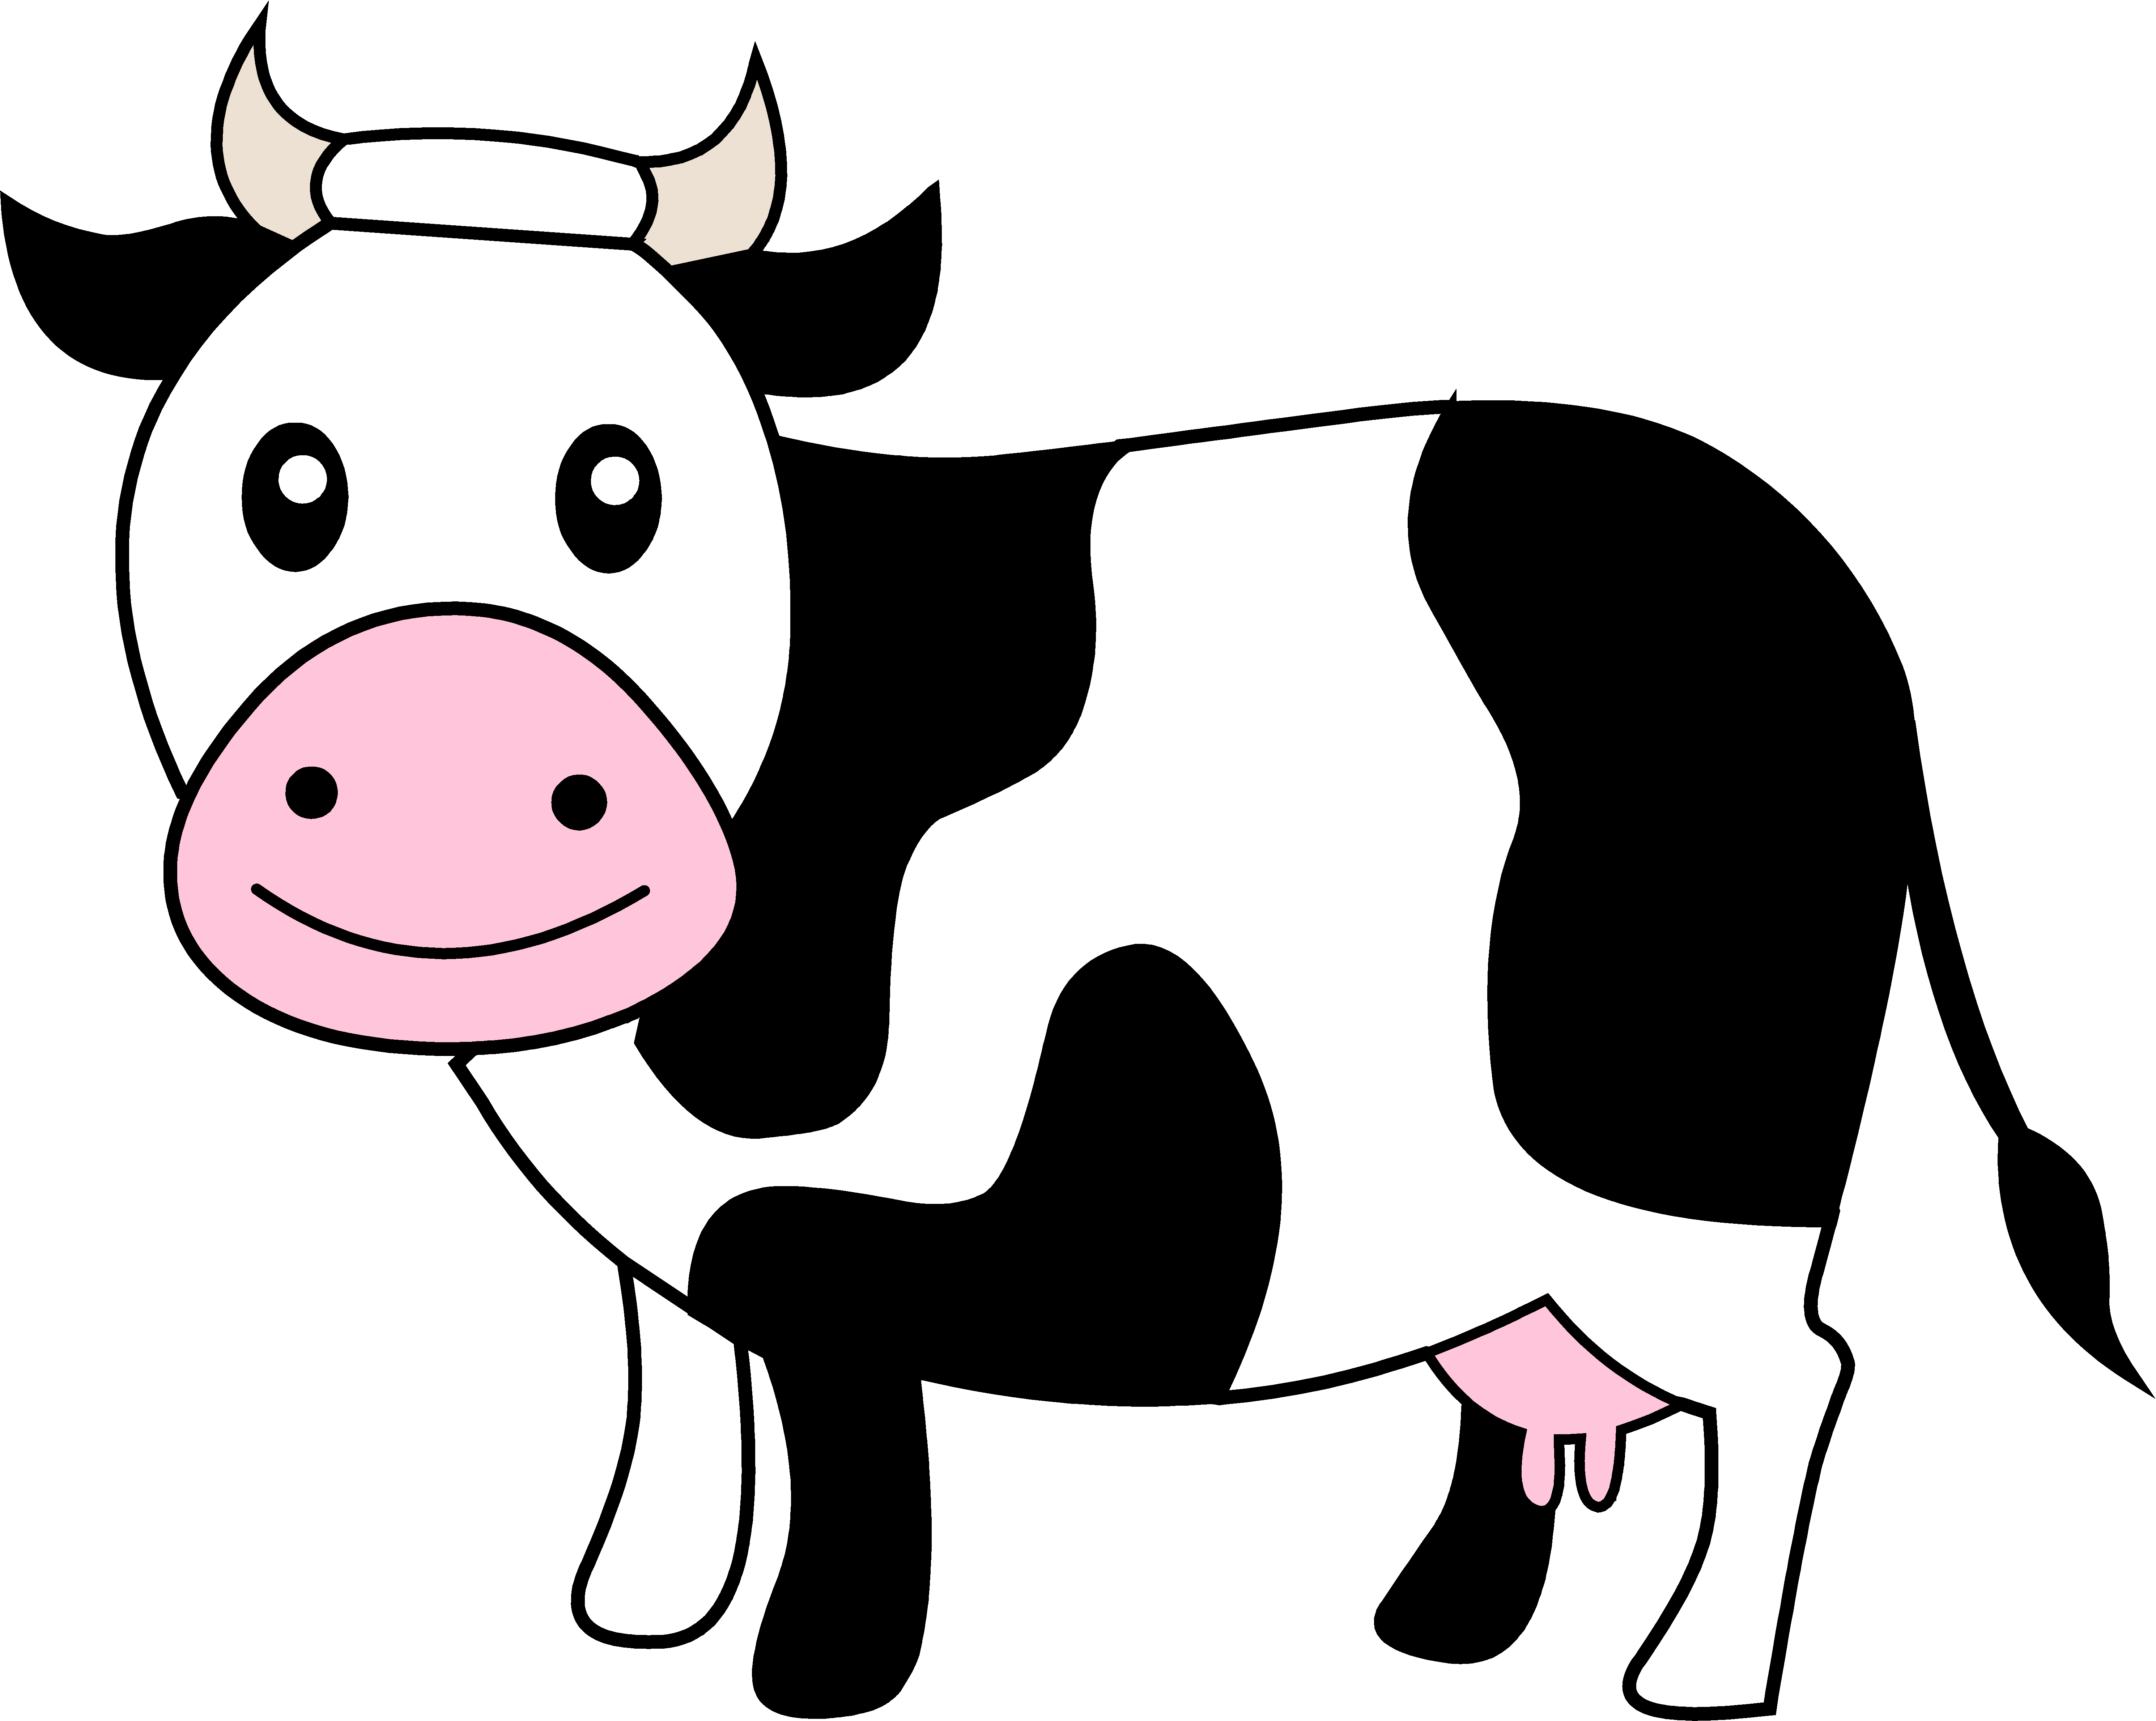 Cow Template Printable - Clipart library